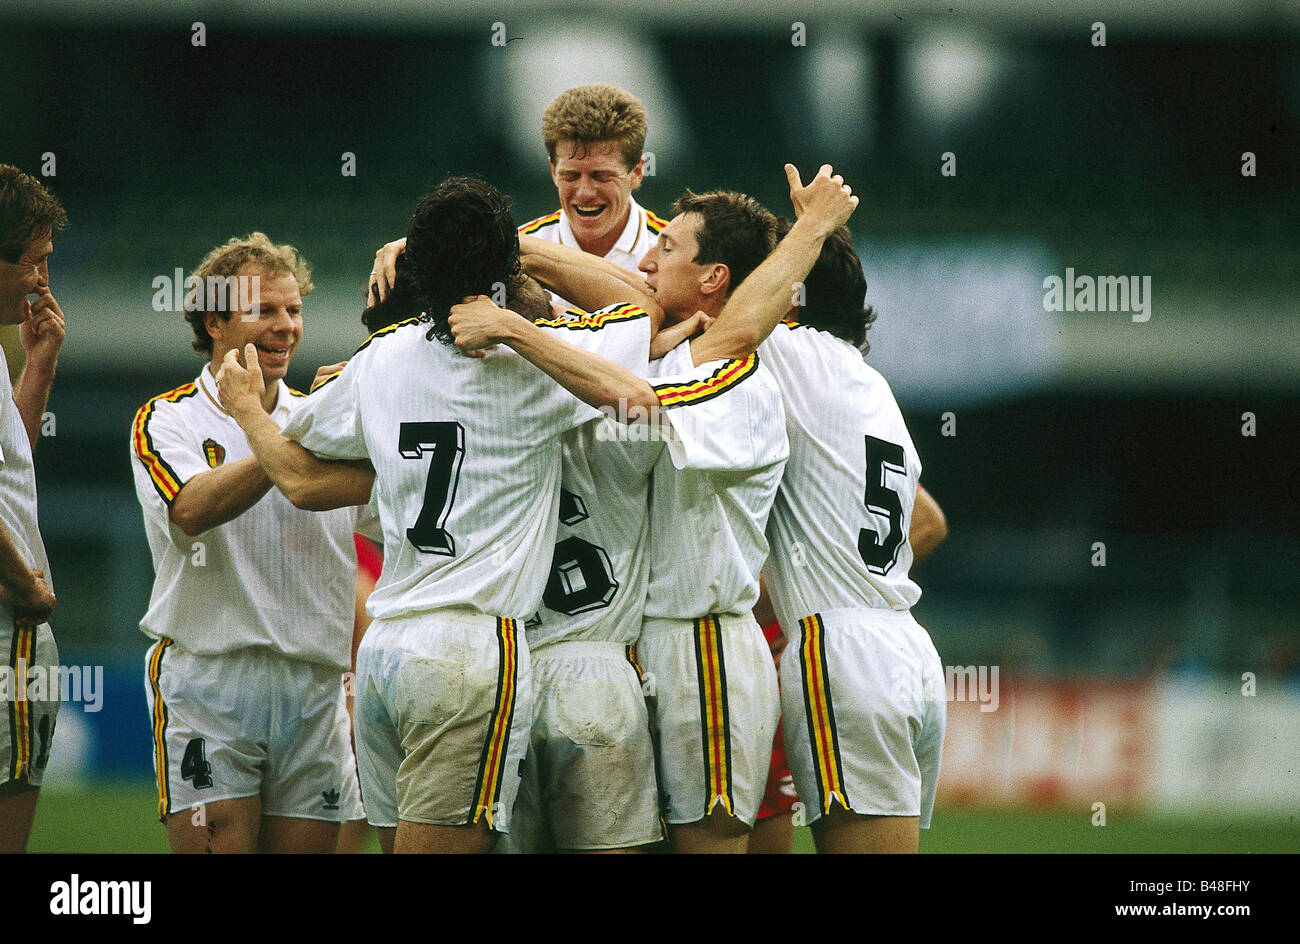 Sport / Sports, soccer, football, World Cup 1990, final round, group match, Belgium against South Korea, (2:0) in Verona, Italy, 12.6.1990, Belgian team, match, historic, historical, 20th century, people, 1990s, Stock Photo